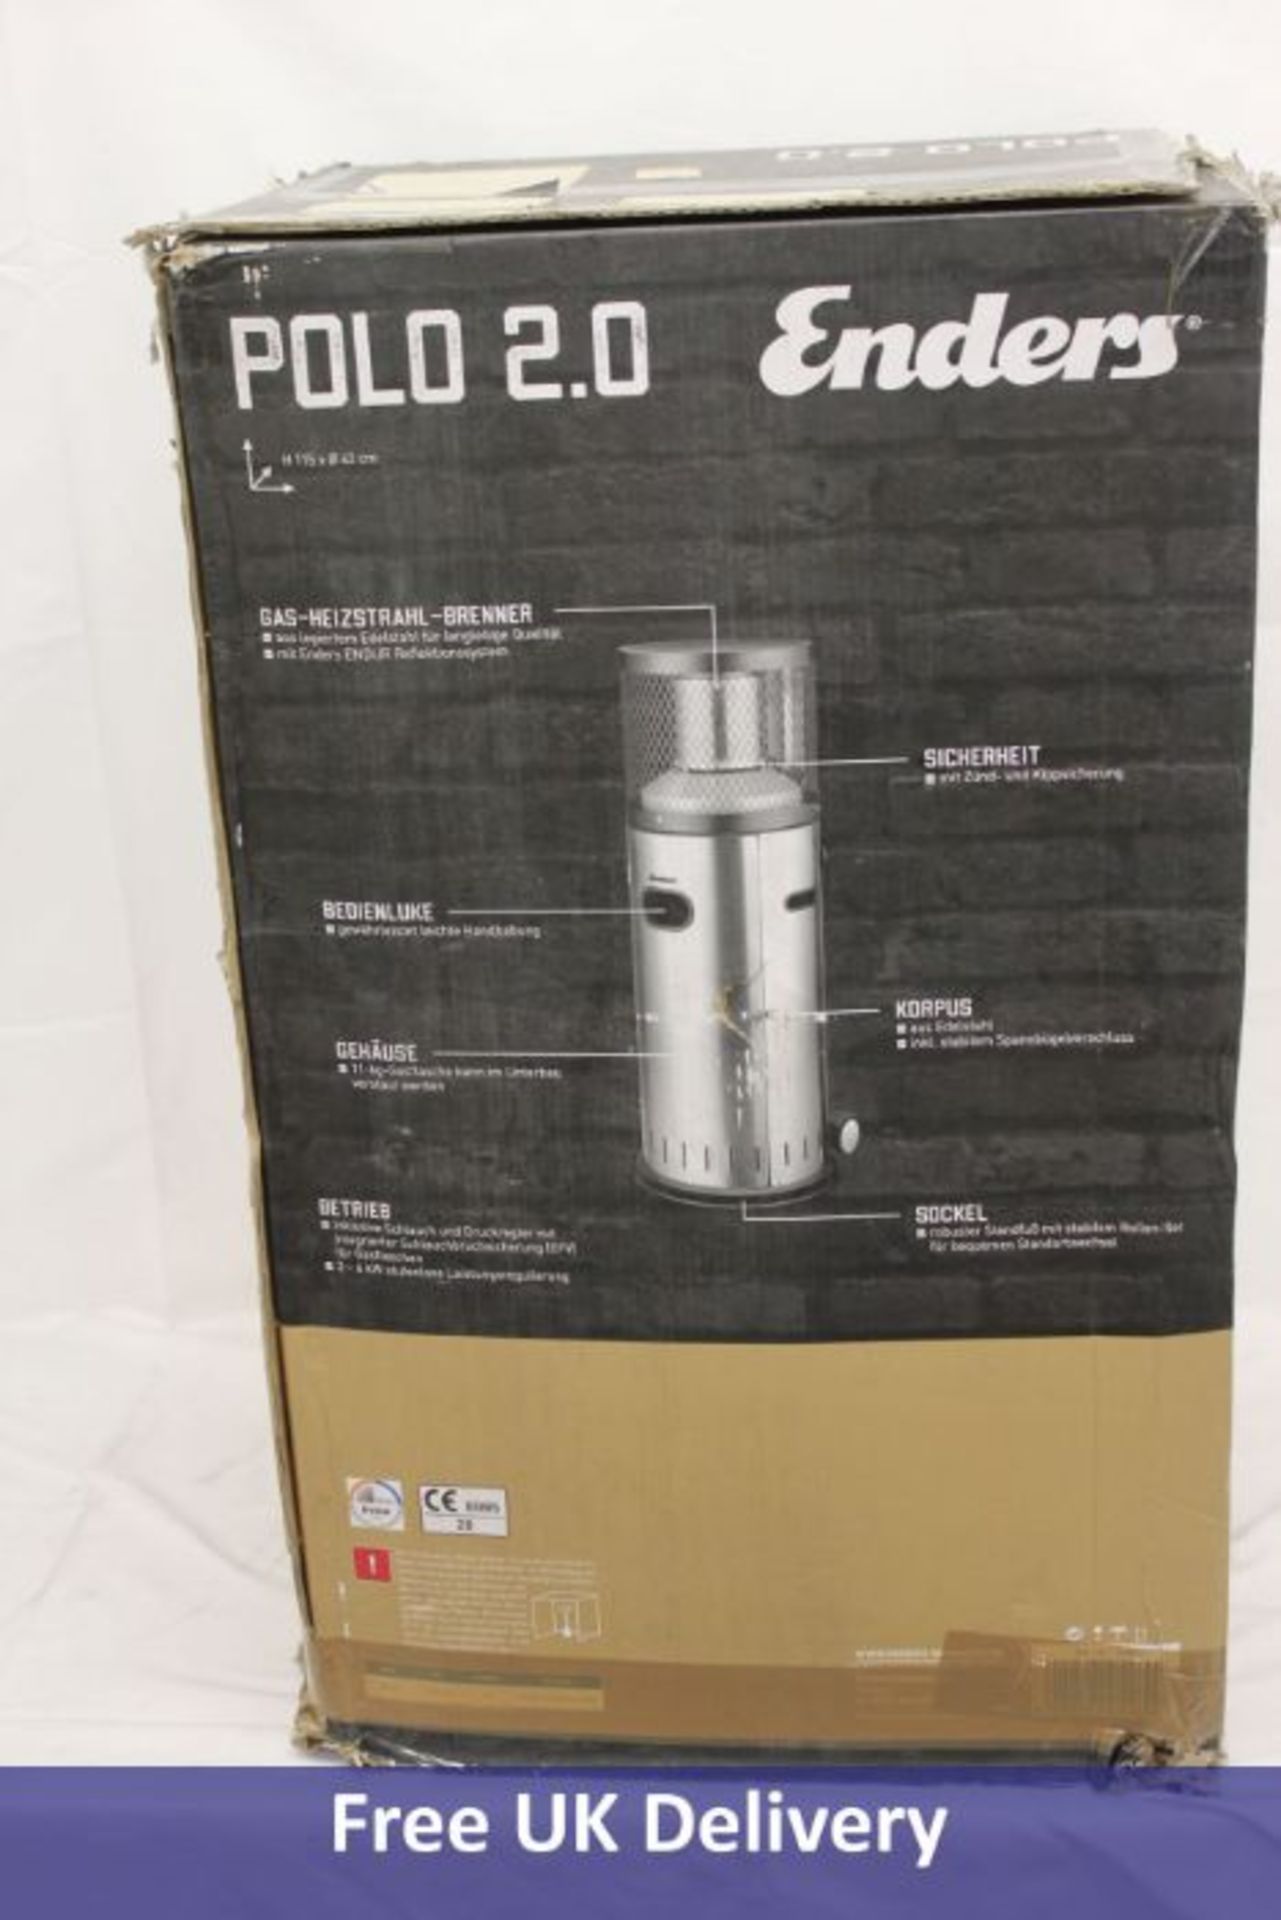 Enders Polo 2.0 Gas Patio Heater